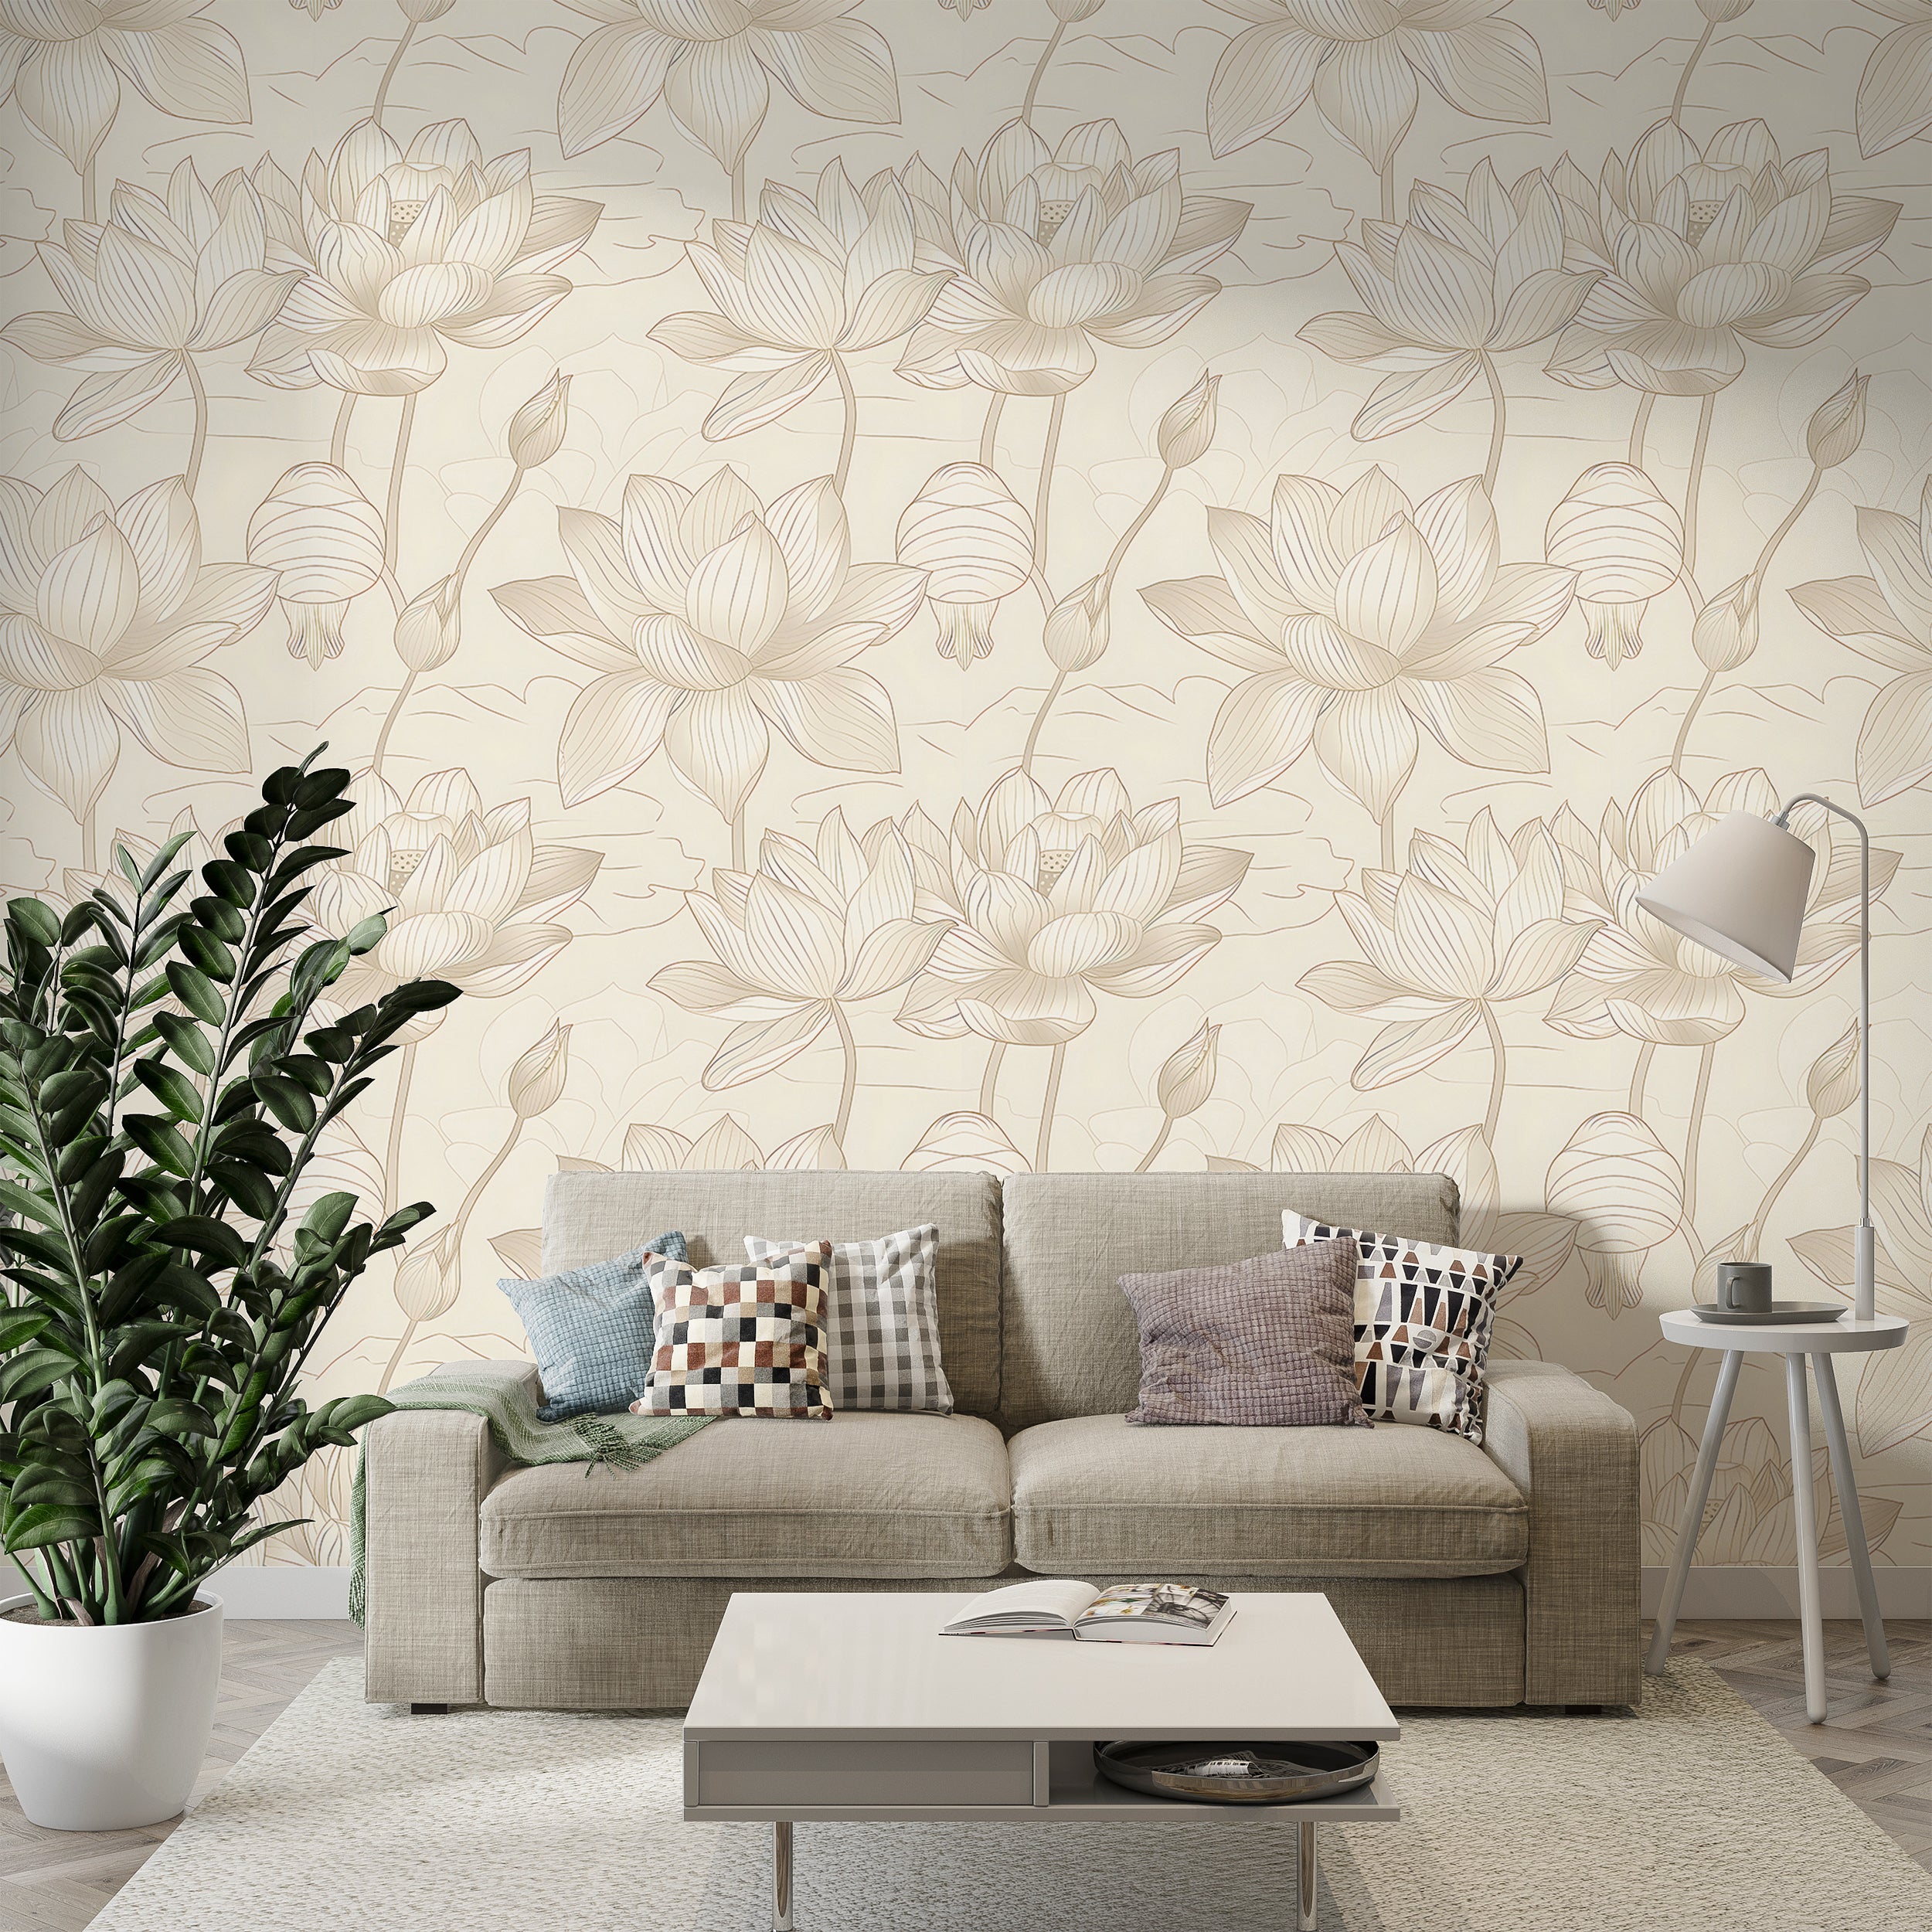 Beige Minimalistic Lotus Wallpaper, Peel and Stick Floral Wall Decal, Light Beige Lotus Pattern Wallpaper, Removable Botanical PVC-free Decor